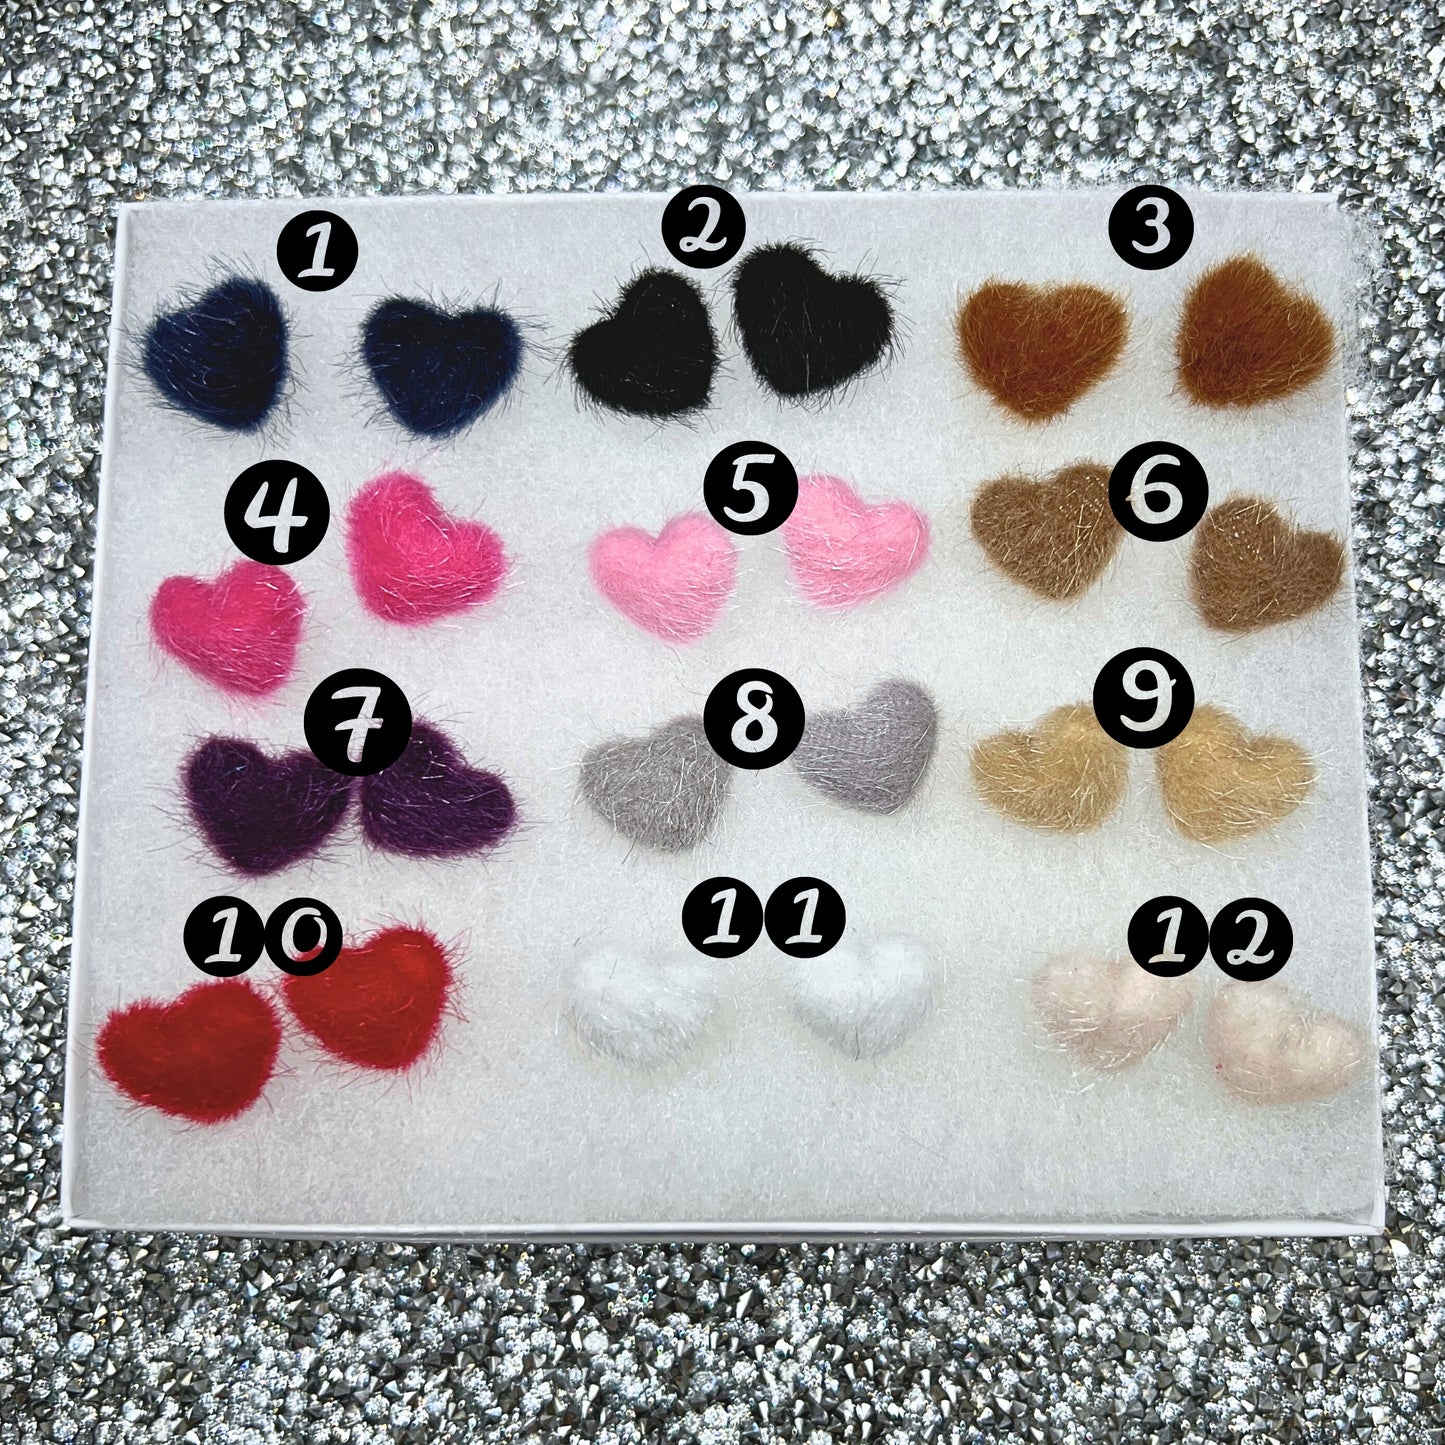 Adorable Fuzzy Teddy Bear Heart Earrings – a sweet Valentine's Day gift. Handmade with love for a cozy and stylish touch. Shop now at Extra Kitsch! This photo displays all of the colors next to each other for comparison with numbers assigned to each color.